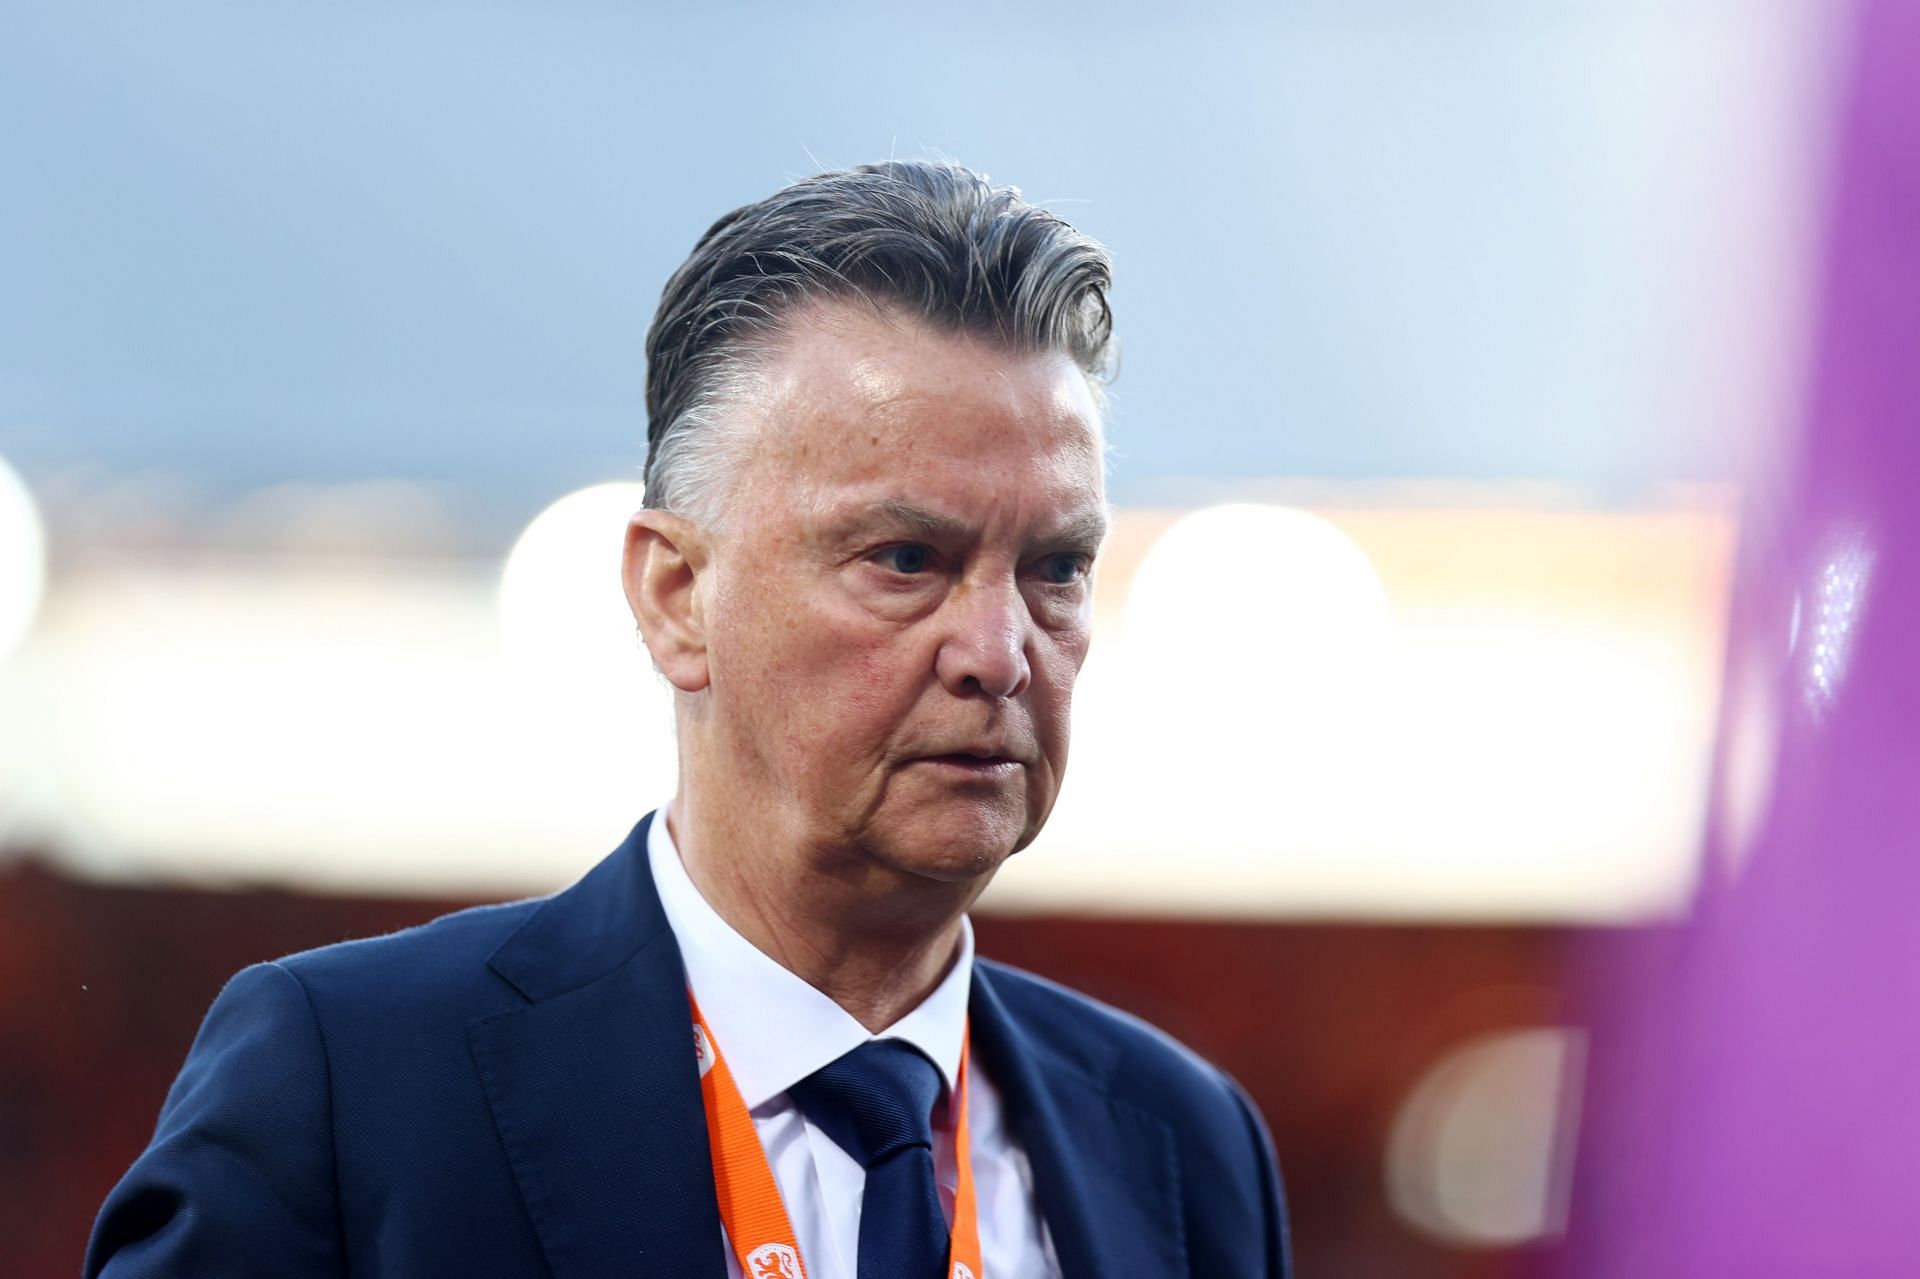 “Dictator has started his tactics”, “Has some weird agenda” – Twitter fans slam Louis van Gaal’s decision to bench 23-year-old star ahead of Poland vs Netherlands